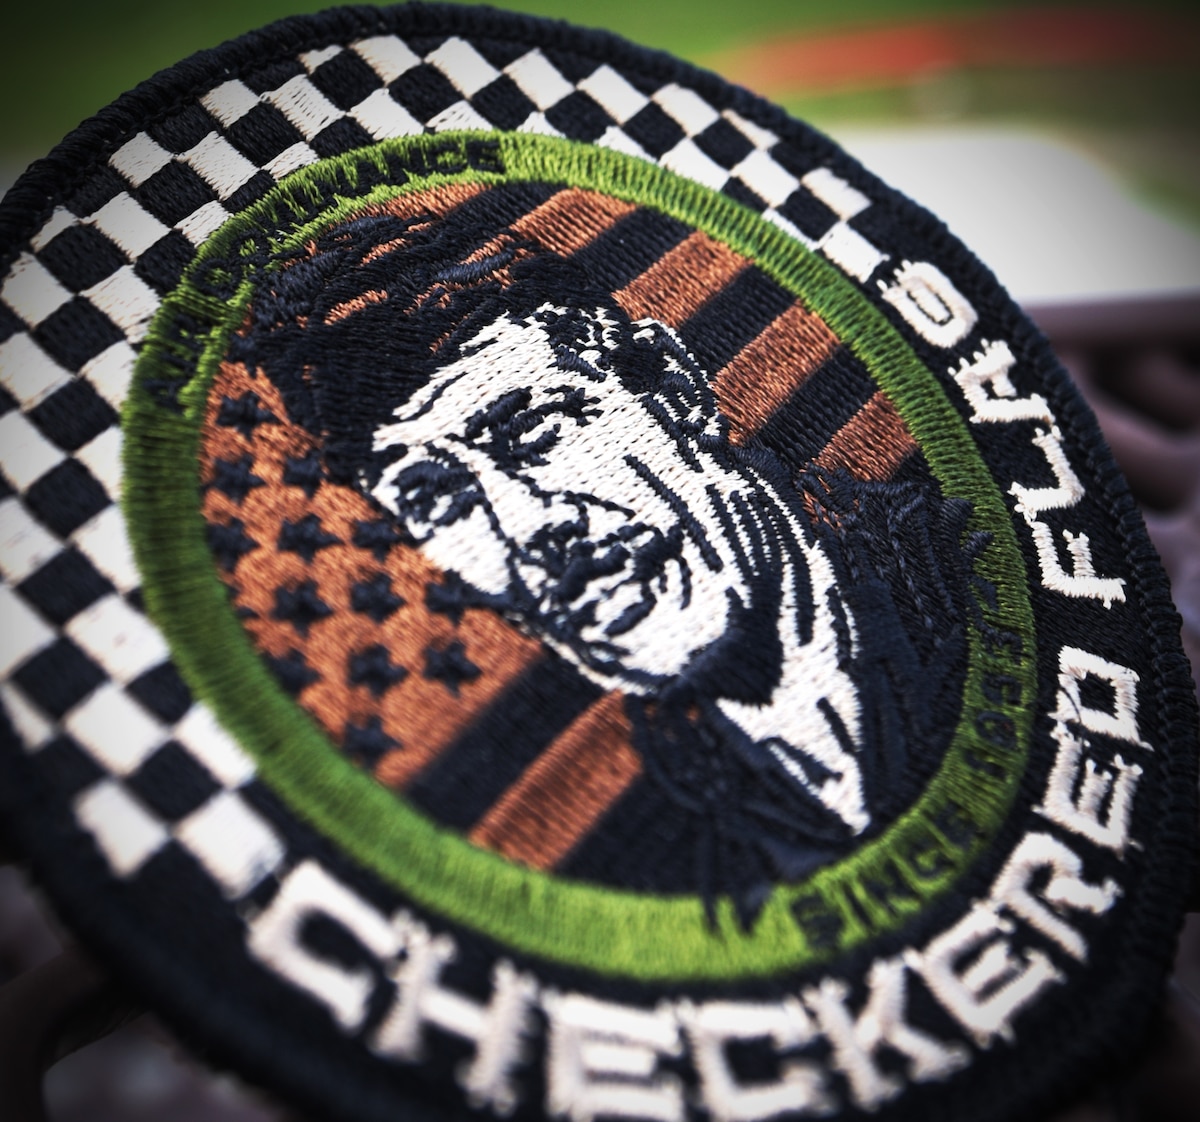 Checkered Flag 22-2 exercise patch